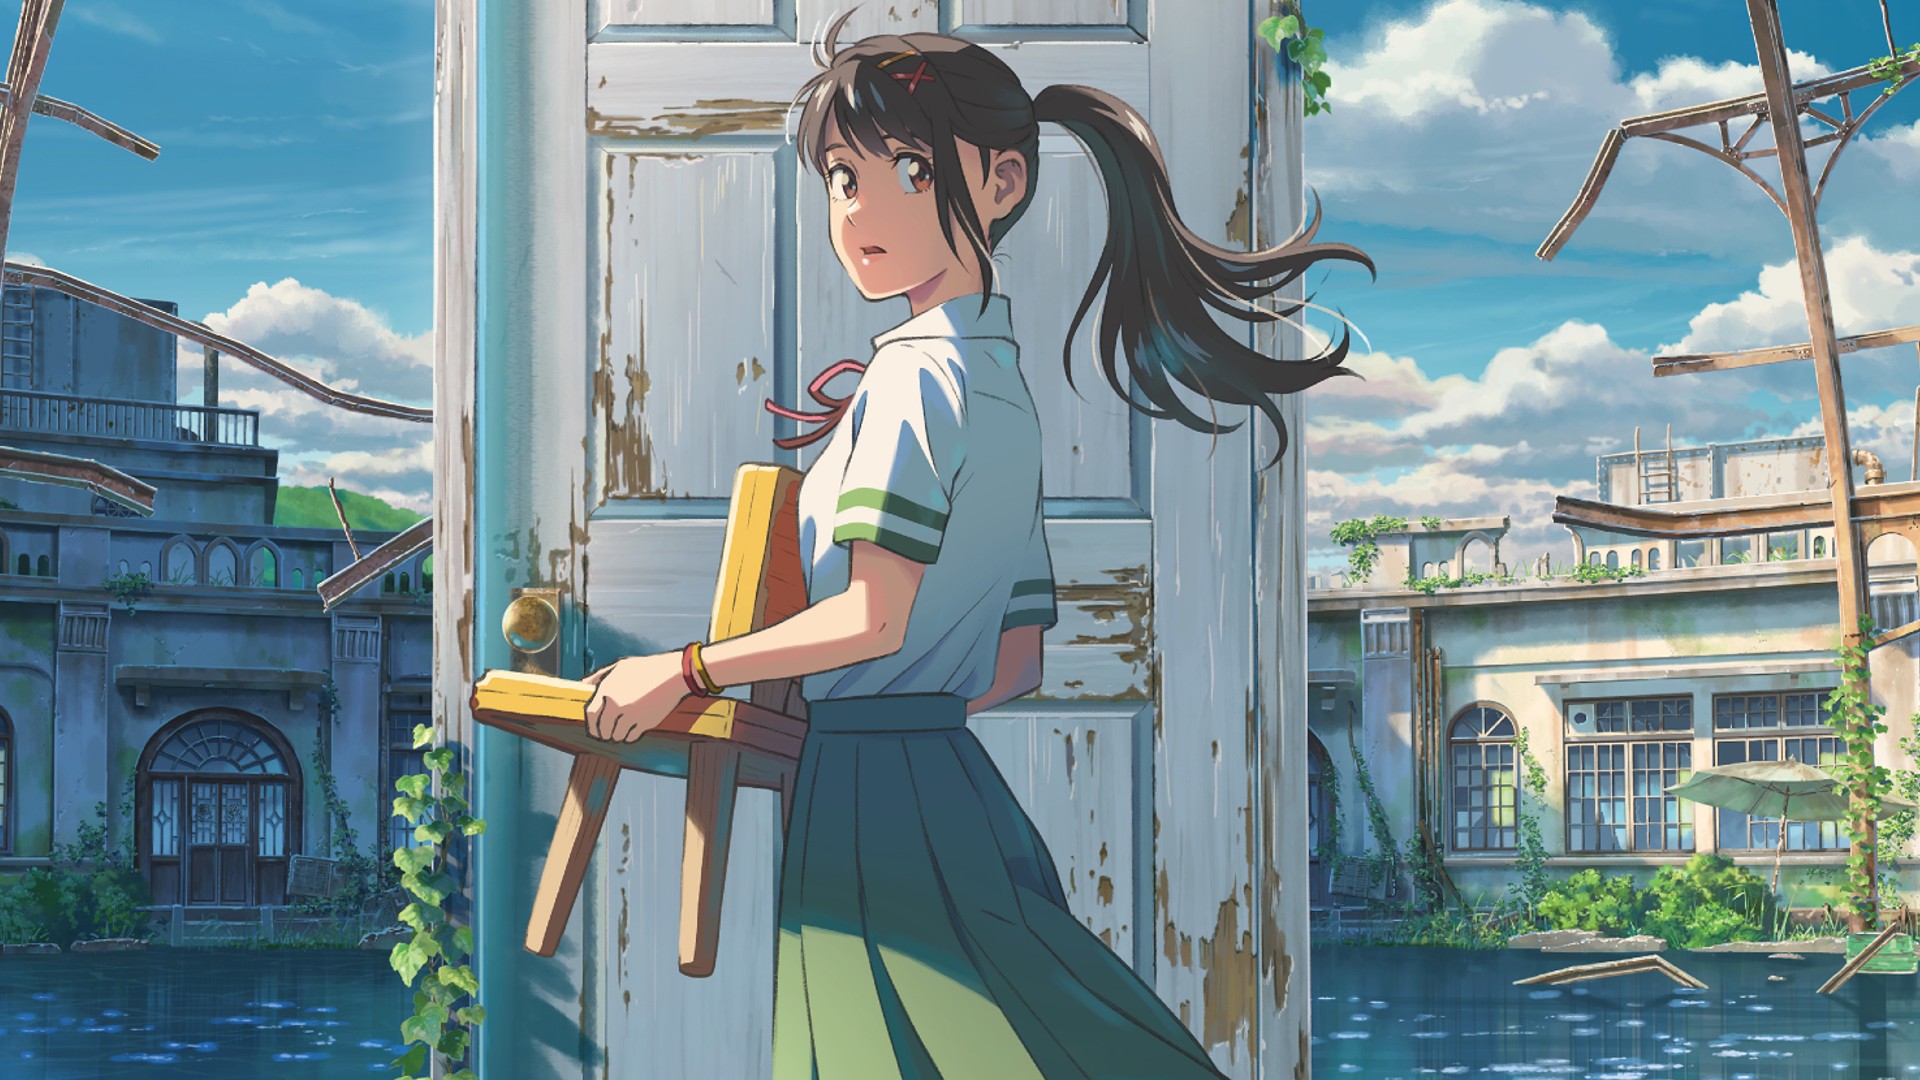 Is a Kimi no Na wa (Your Name) Sequel Possible?